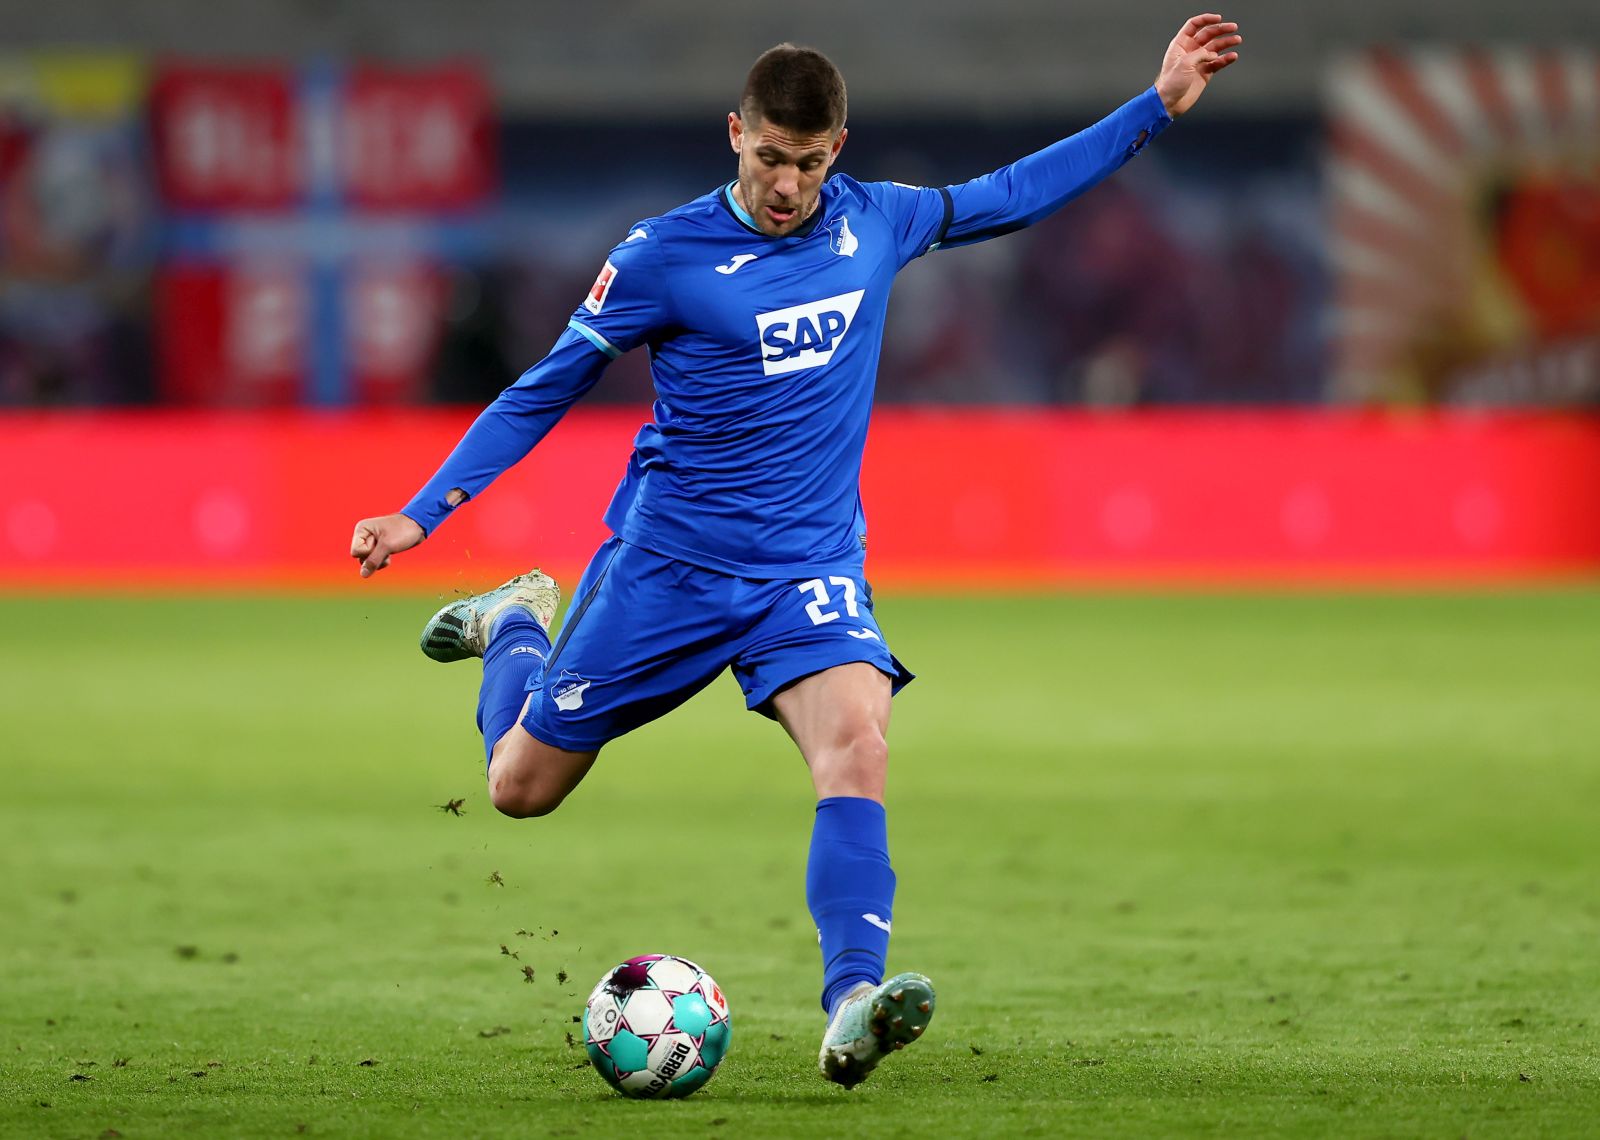 epa09140565 Andrej Kramaric of TSG Hoffenheim controls the ball during the German Bundesliga soccer match between RB Leipzig and TSG Hoffenheim at Red Bull Arena in Leipzig, Germany, 16 April 2021.  EPA/MARTIN ROSE / POOL DFL regulations prohibit any use of photographs as image sequences and/or quasi-video.